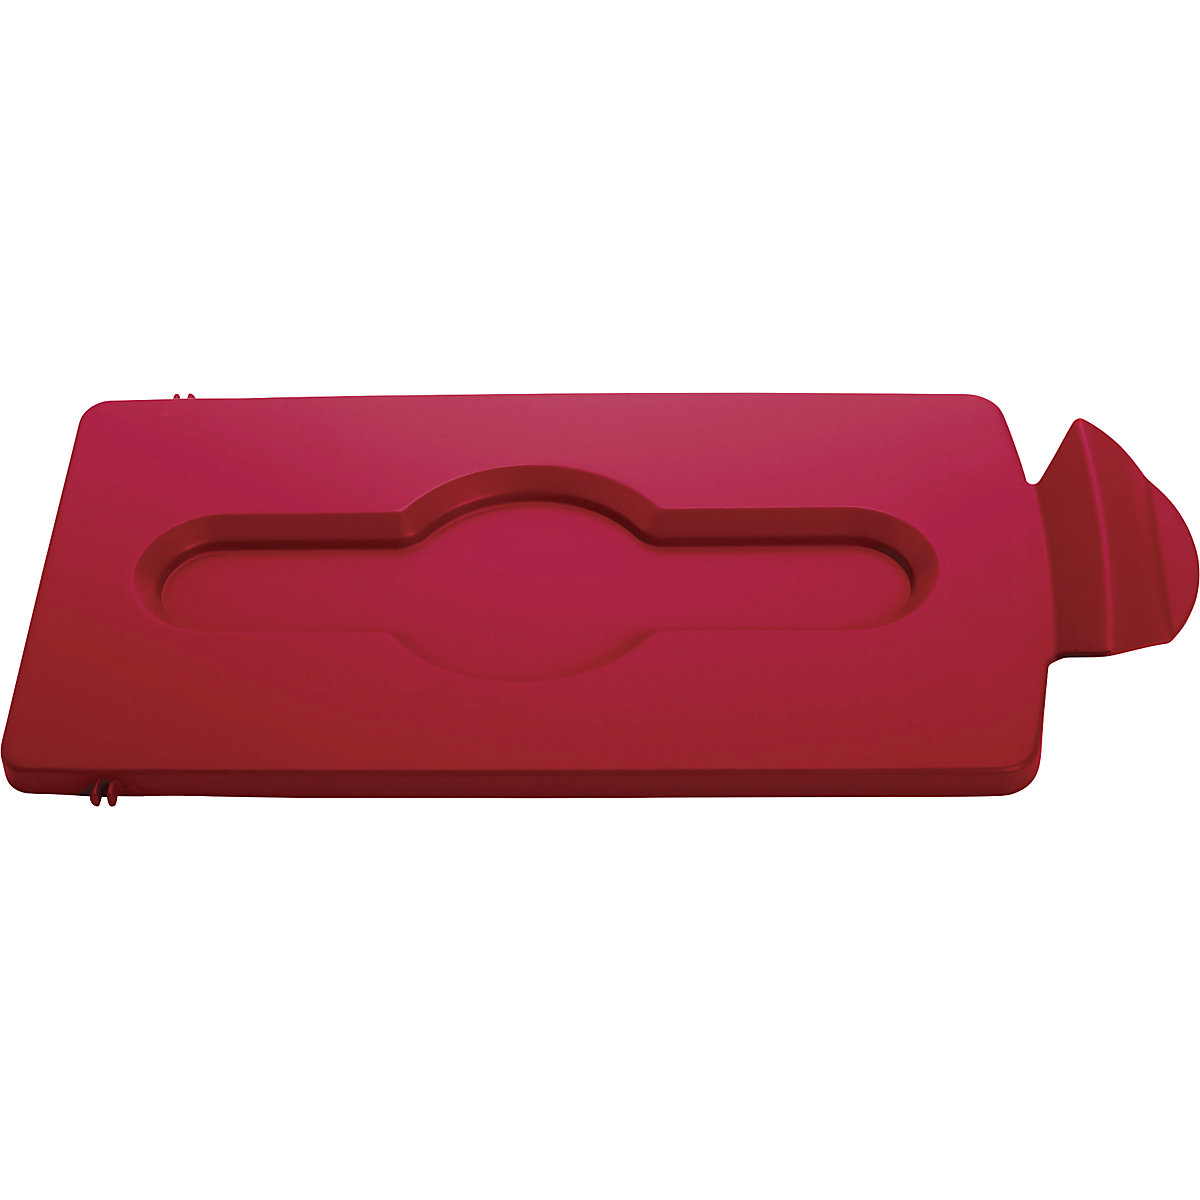 Lid insert – Rubbermaid, closed, red